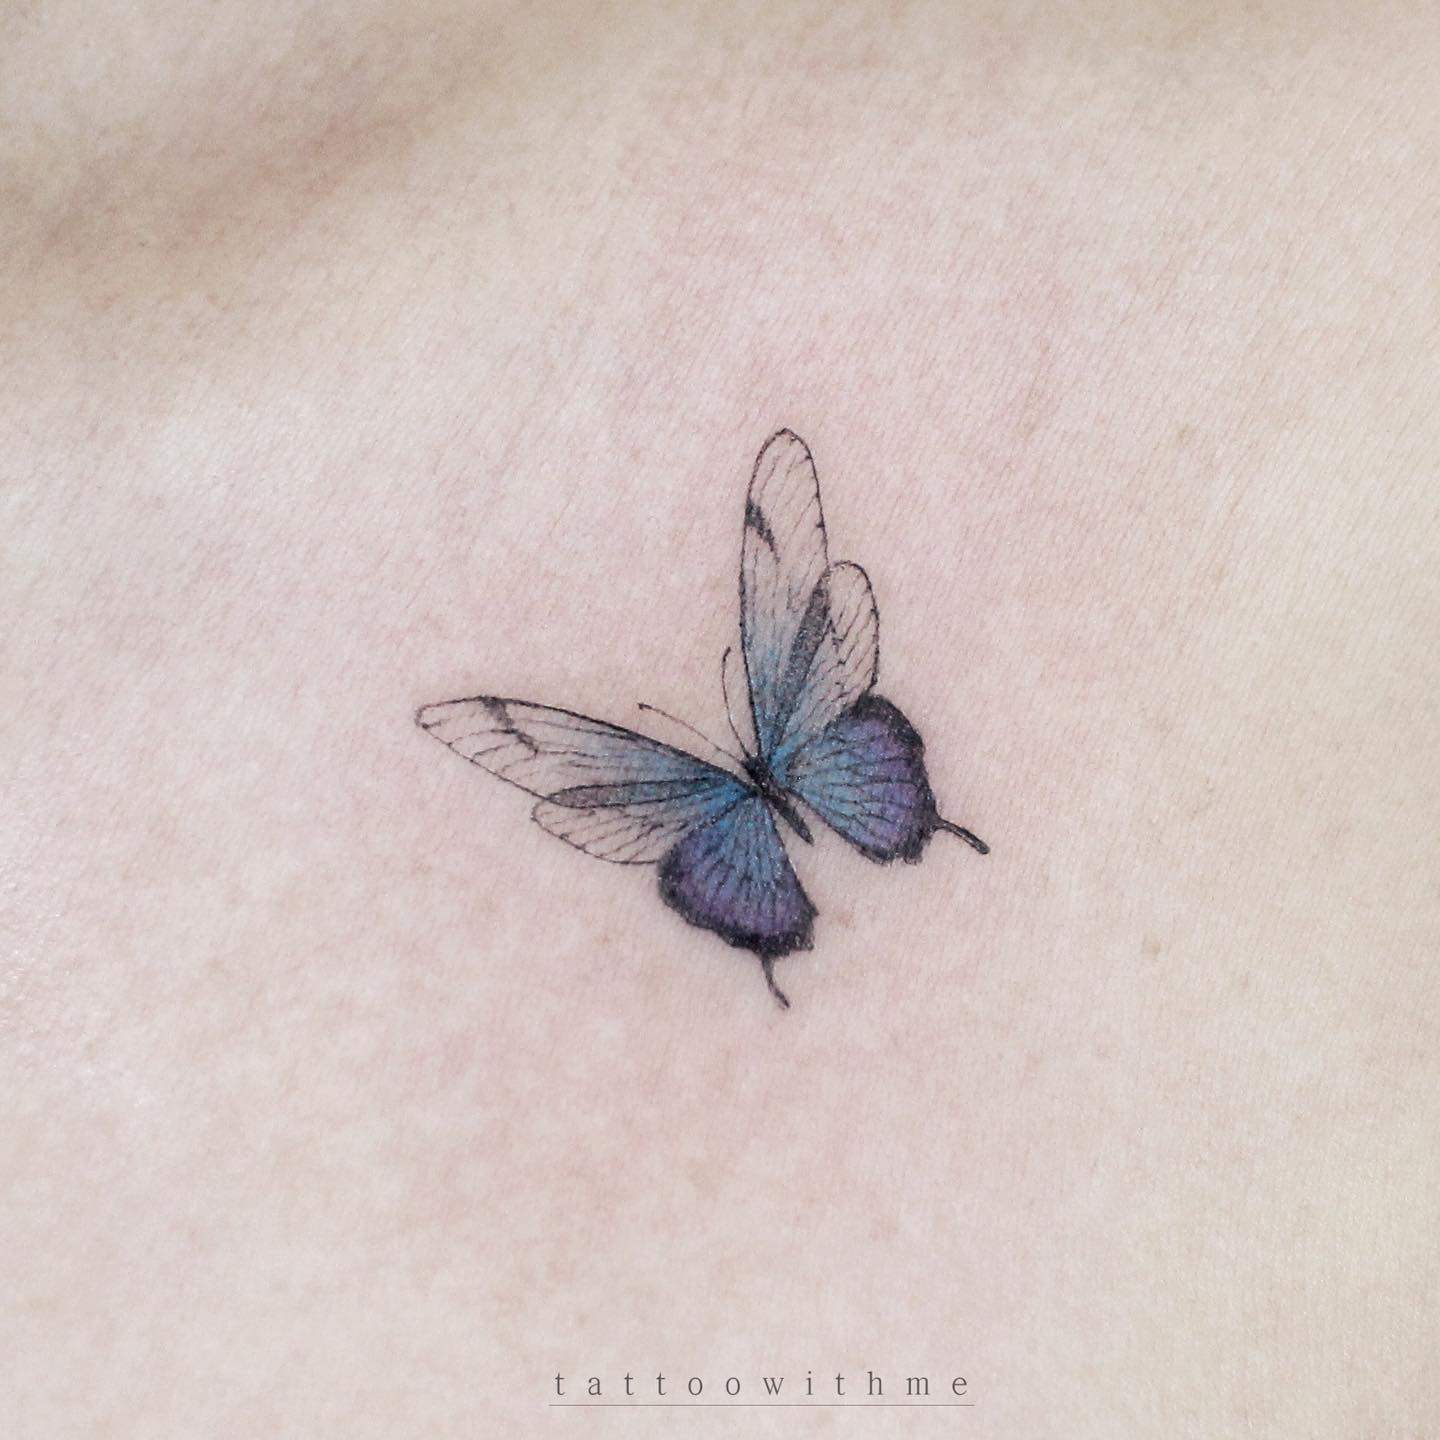 Purplr butterfly tattoo by tattoowithme